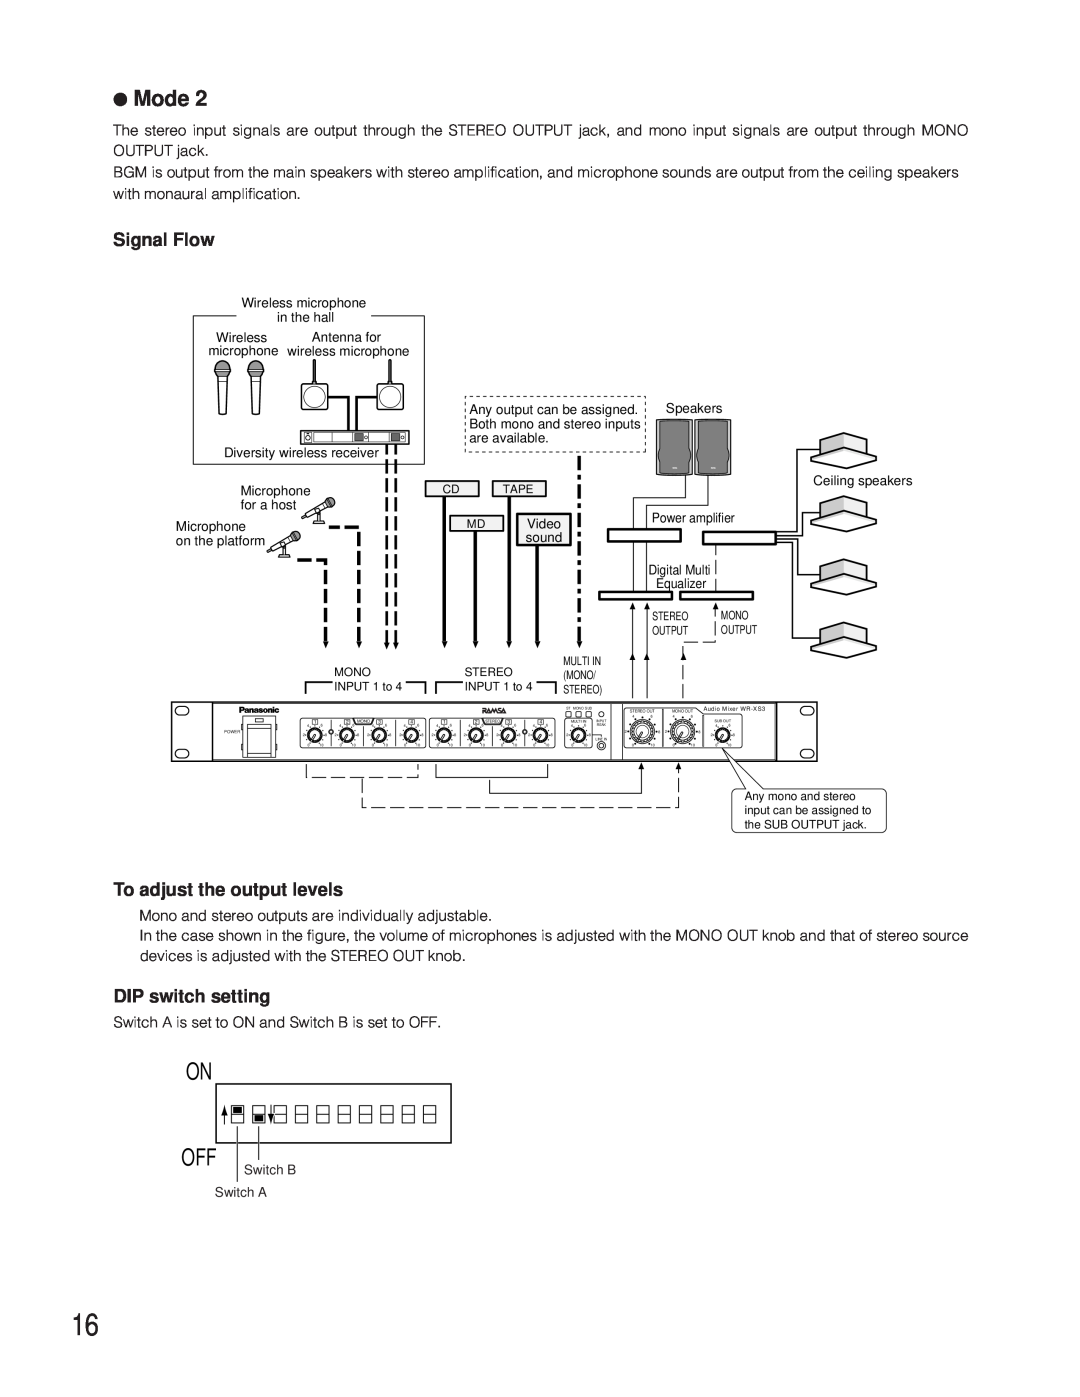 Panasonic WR-XS3P operating instructions On Off, Mode, Signal Flow, To adjust the output levels, DIP switch setting 